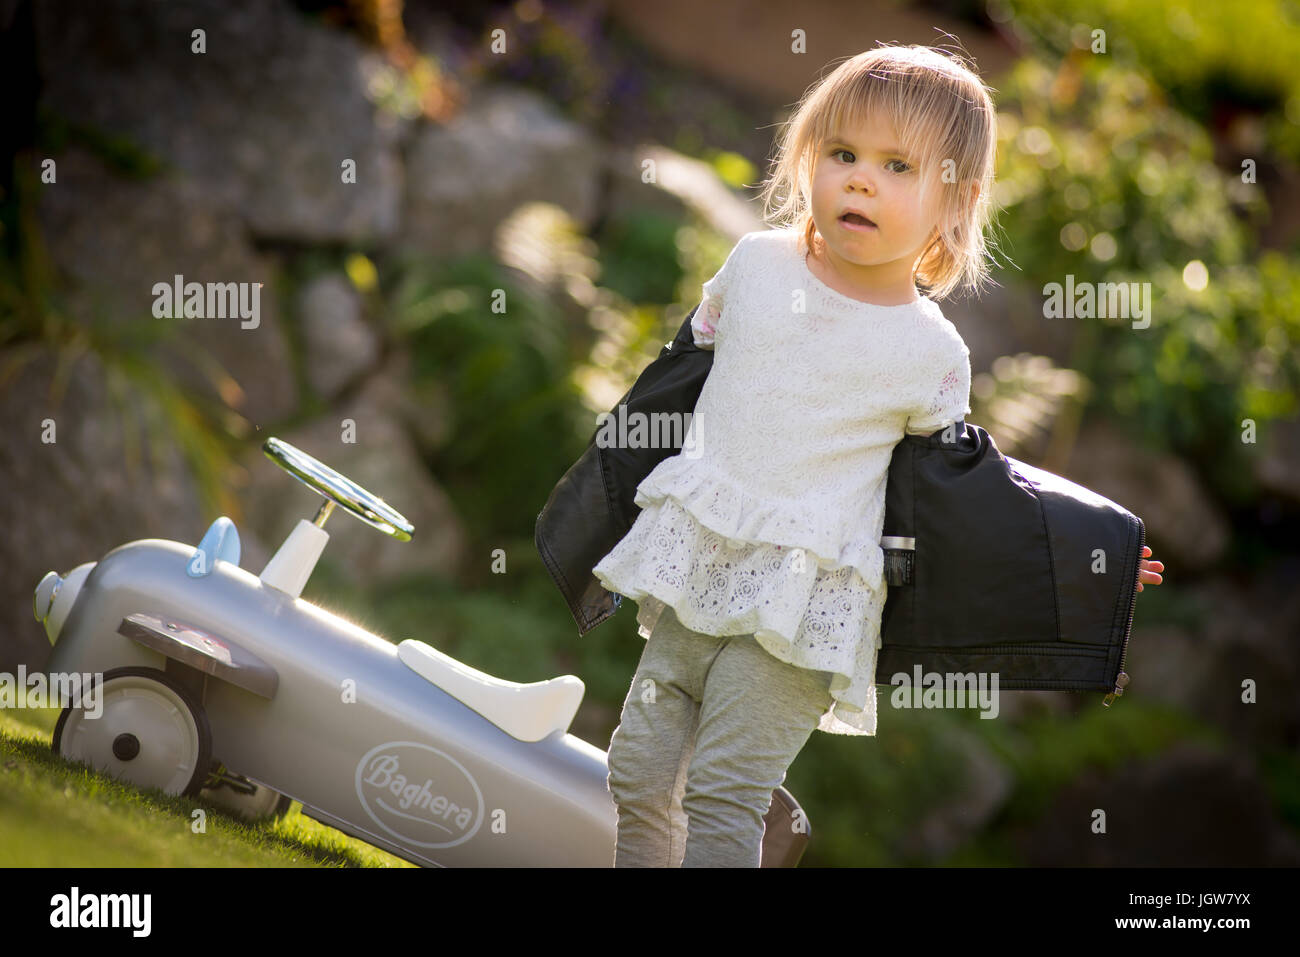 young child  girl taking off jacket after  a toy plane flight Stock Photo